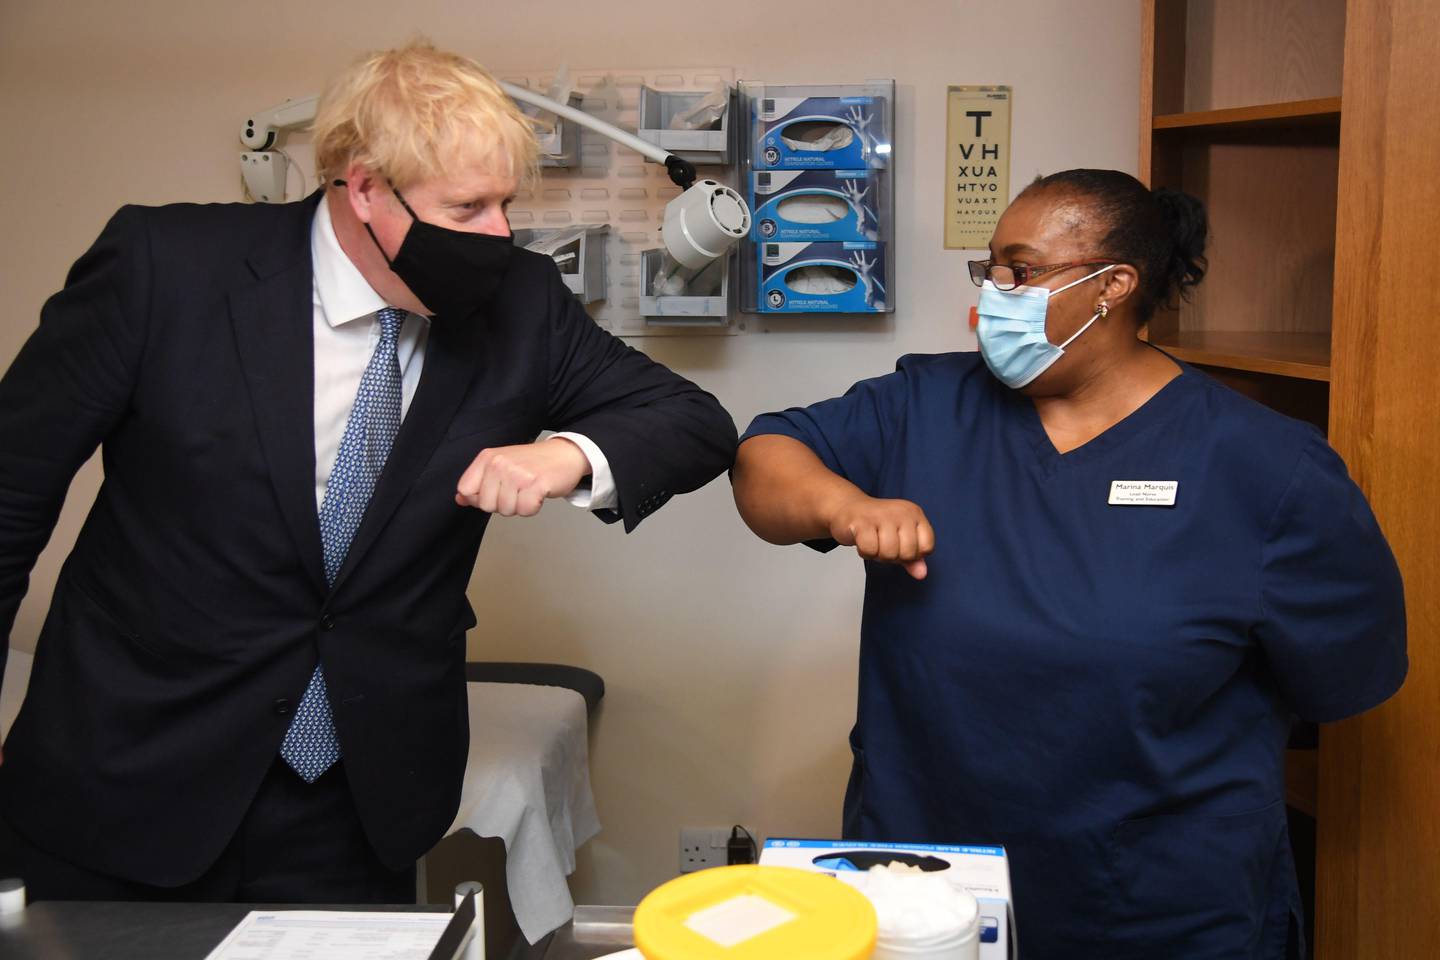 Britain's Prime Minister Boris Johnson bumps elbows with a staff member during his visit to the Tollgate Medical Centre in Becton, east London on July 24, 2020.. (Photo by Jeremy Selwyn / POOL / AFP)